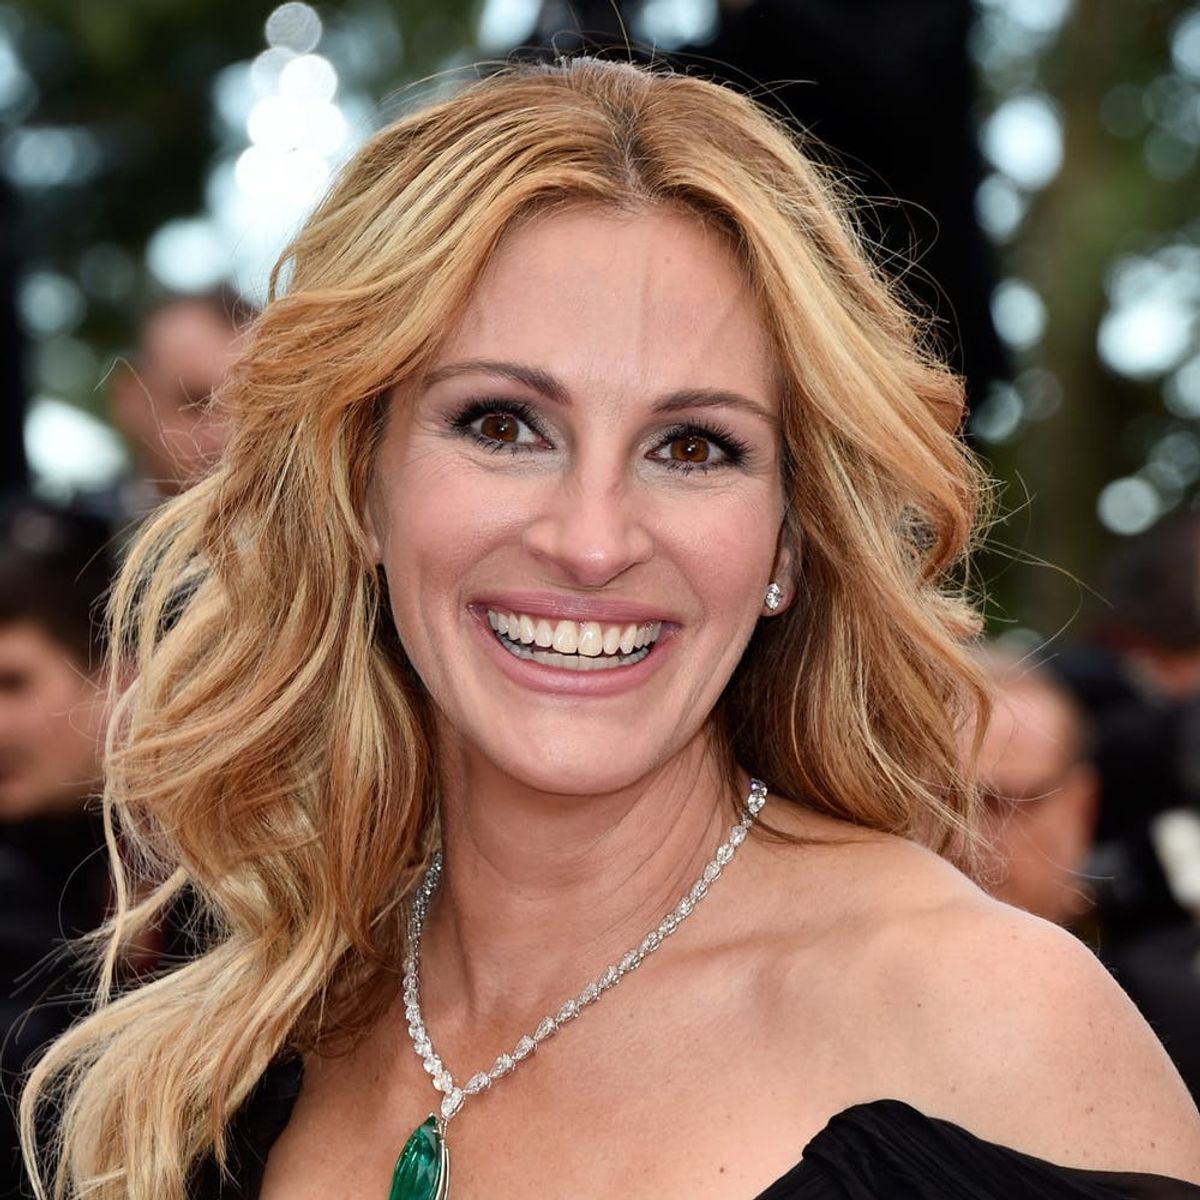 Julia Roberts Says She Was a “Selfish Little Brat” As a Young Actress